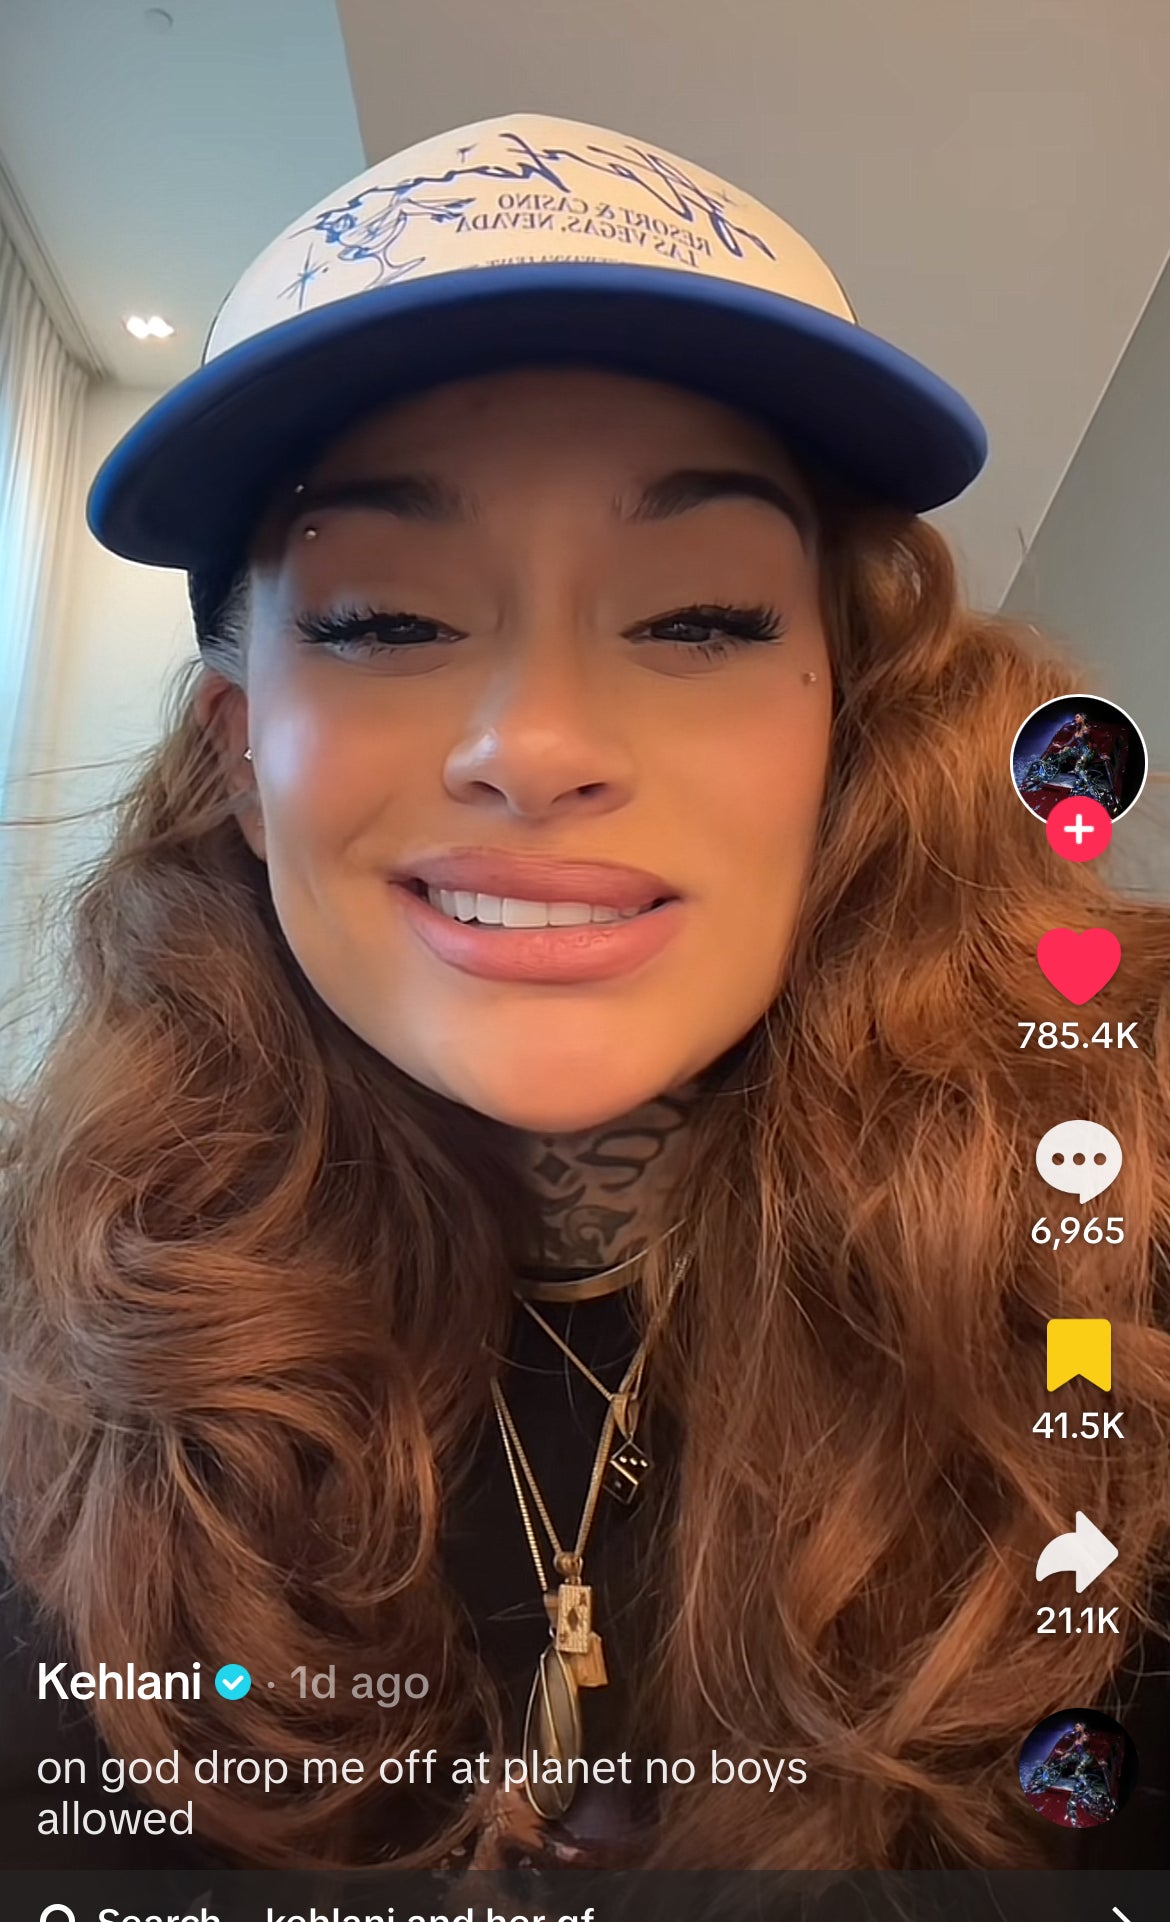 Kehlani wearing a hat, smiling in a TikTok video with text: &quot;on god drop me off at planet no boys allowed.&quot; Video has 785.4K likes and 21.1K shares